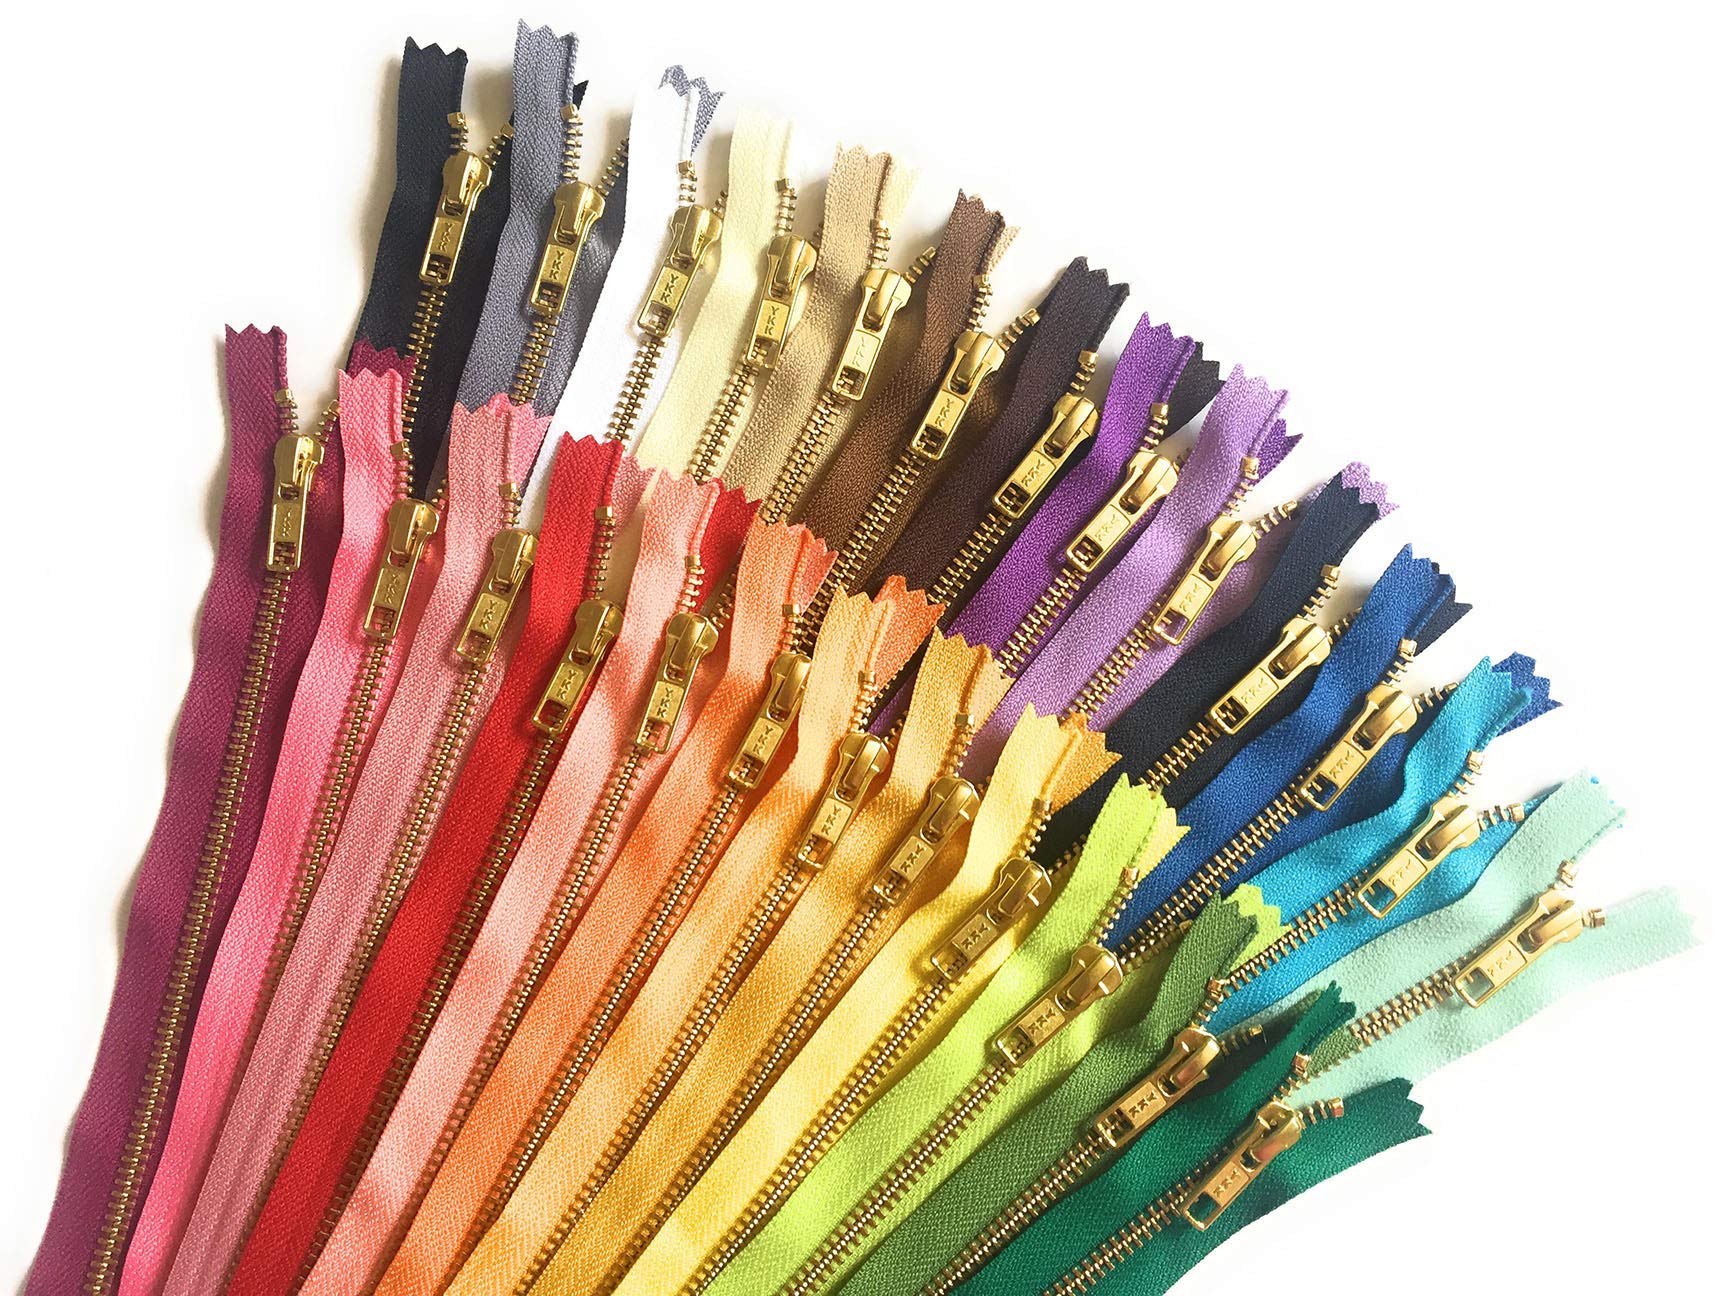 Gold Metal Zippers in 25 Mixed Colors YKK No. 5 Zippers for Bags Sewing Crafts